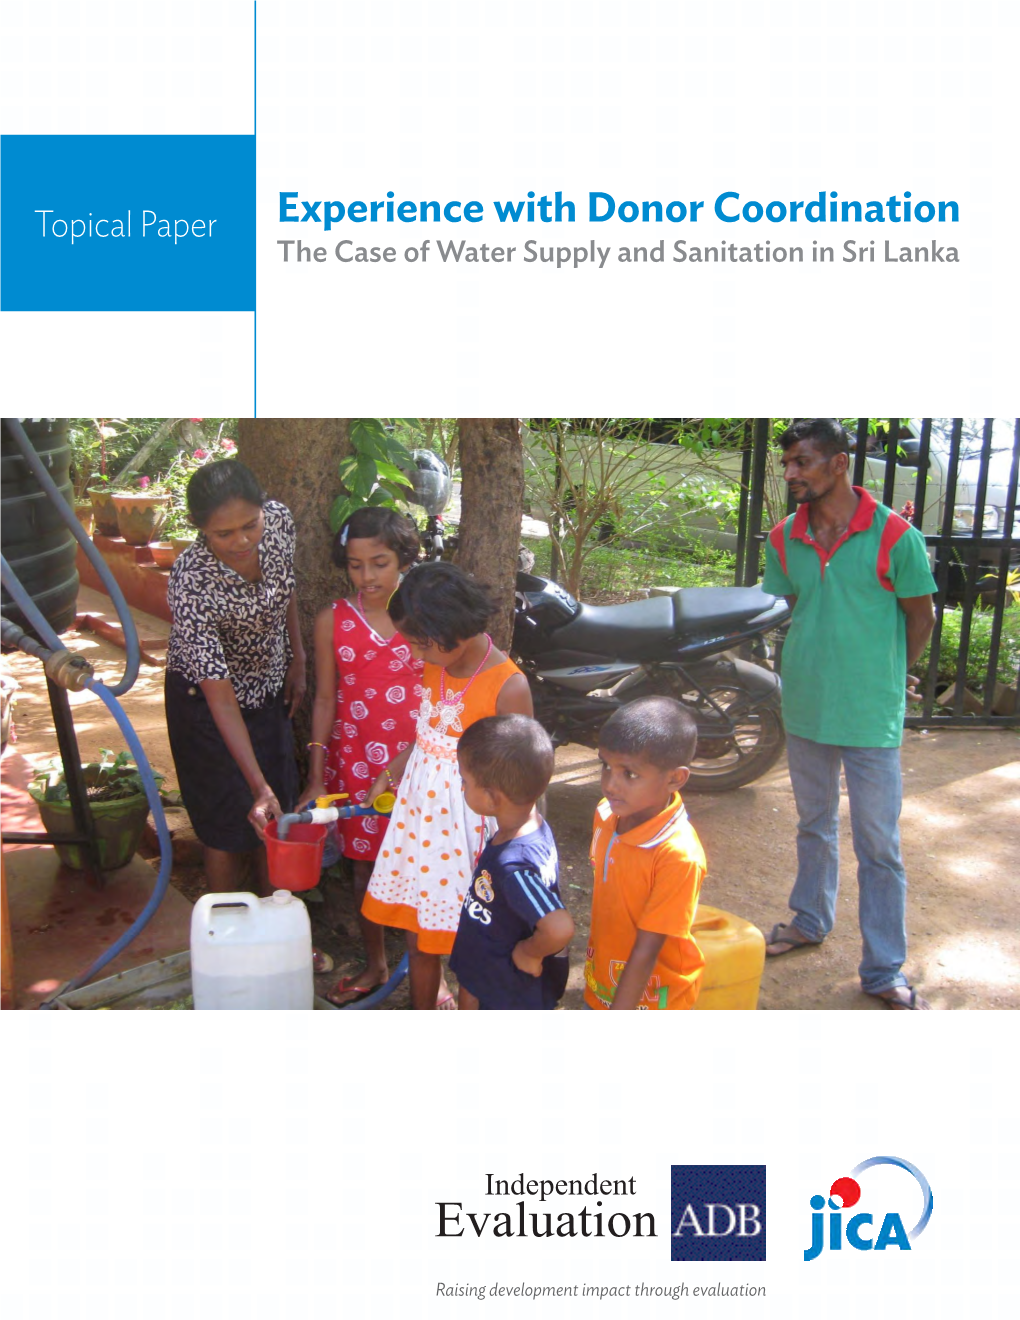 Experience with Donor Coordination: the Case of Water Supply and Sanitation in Sri Lanka